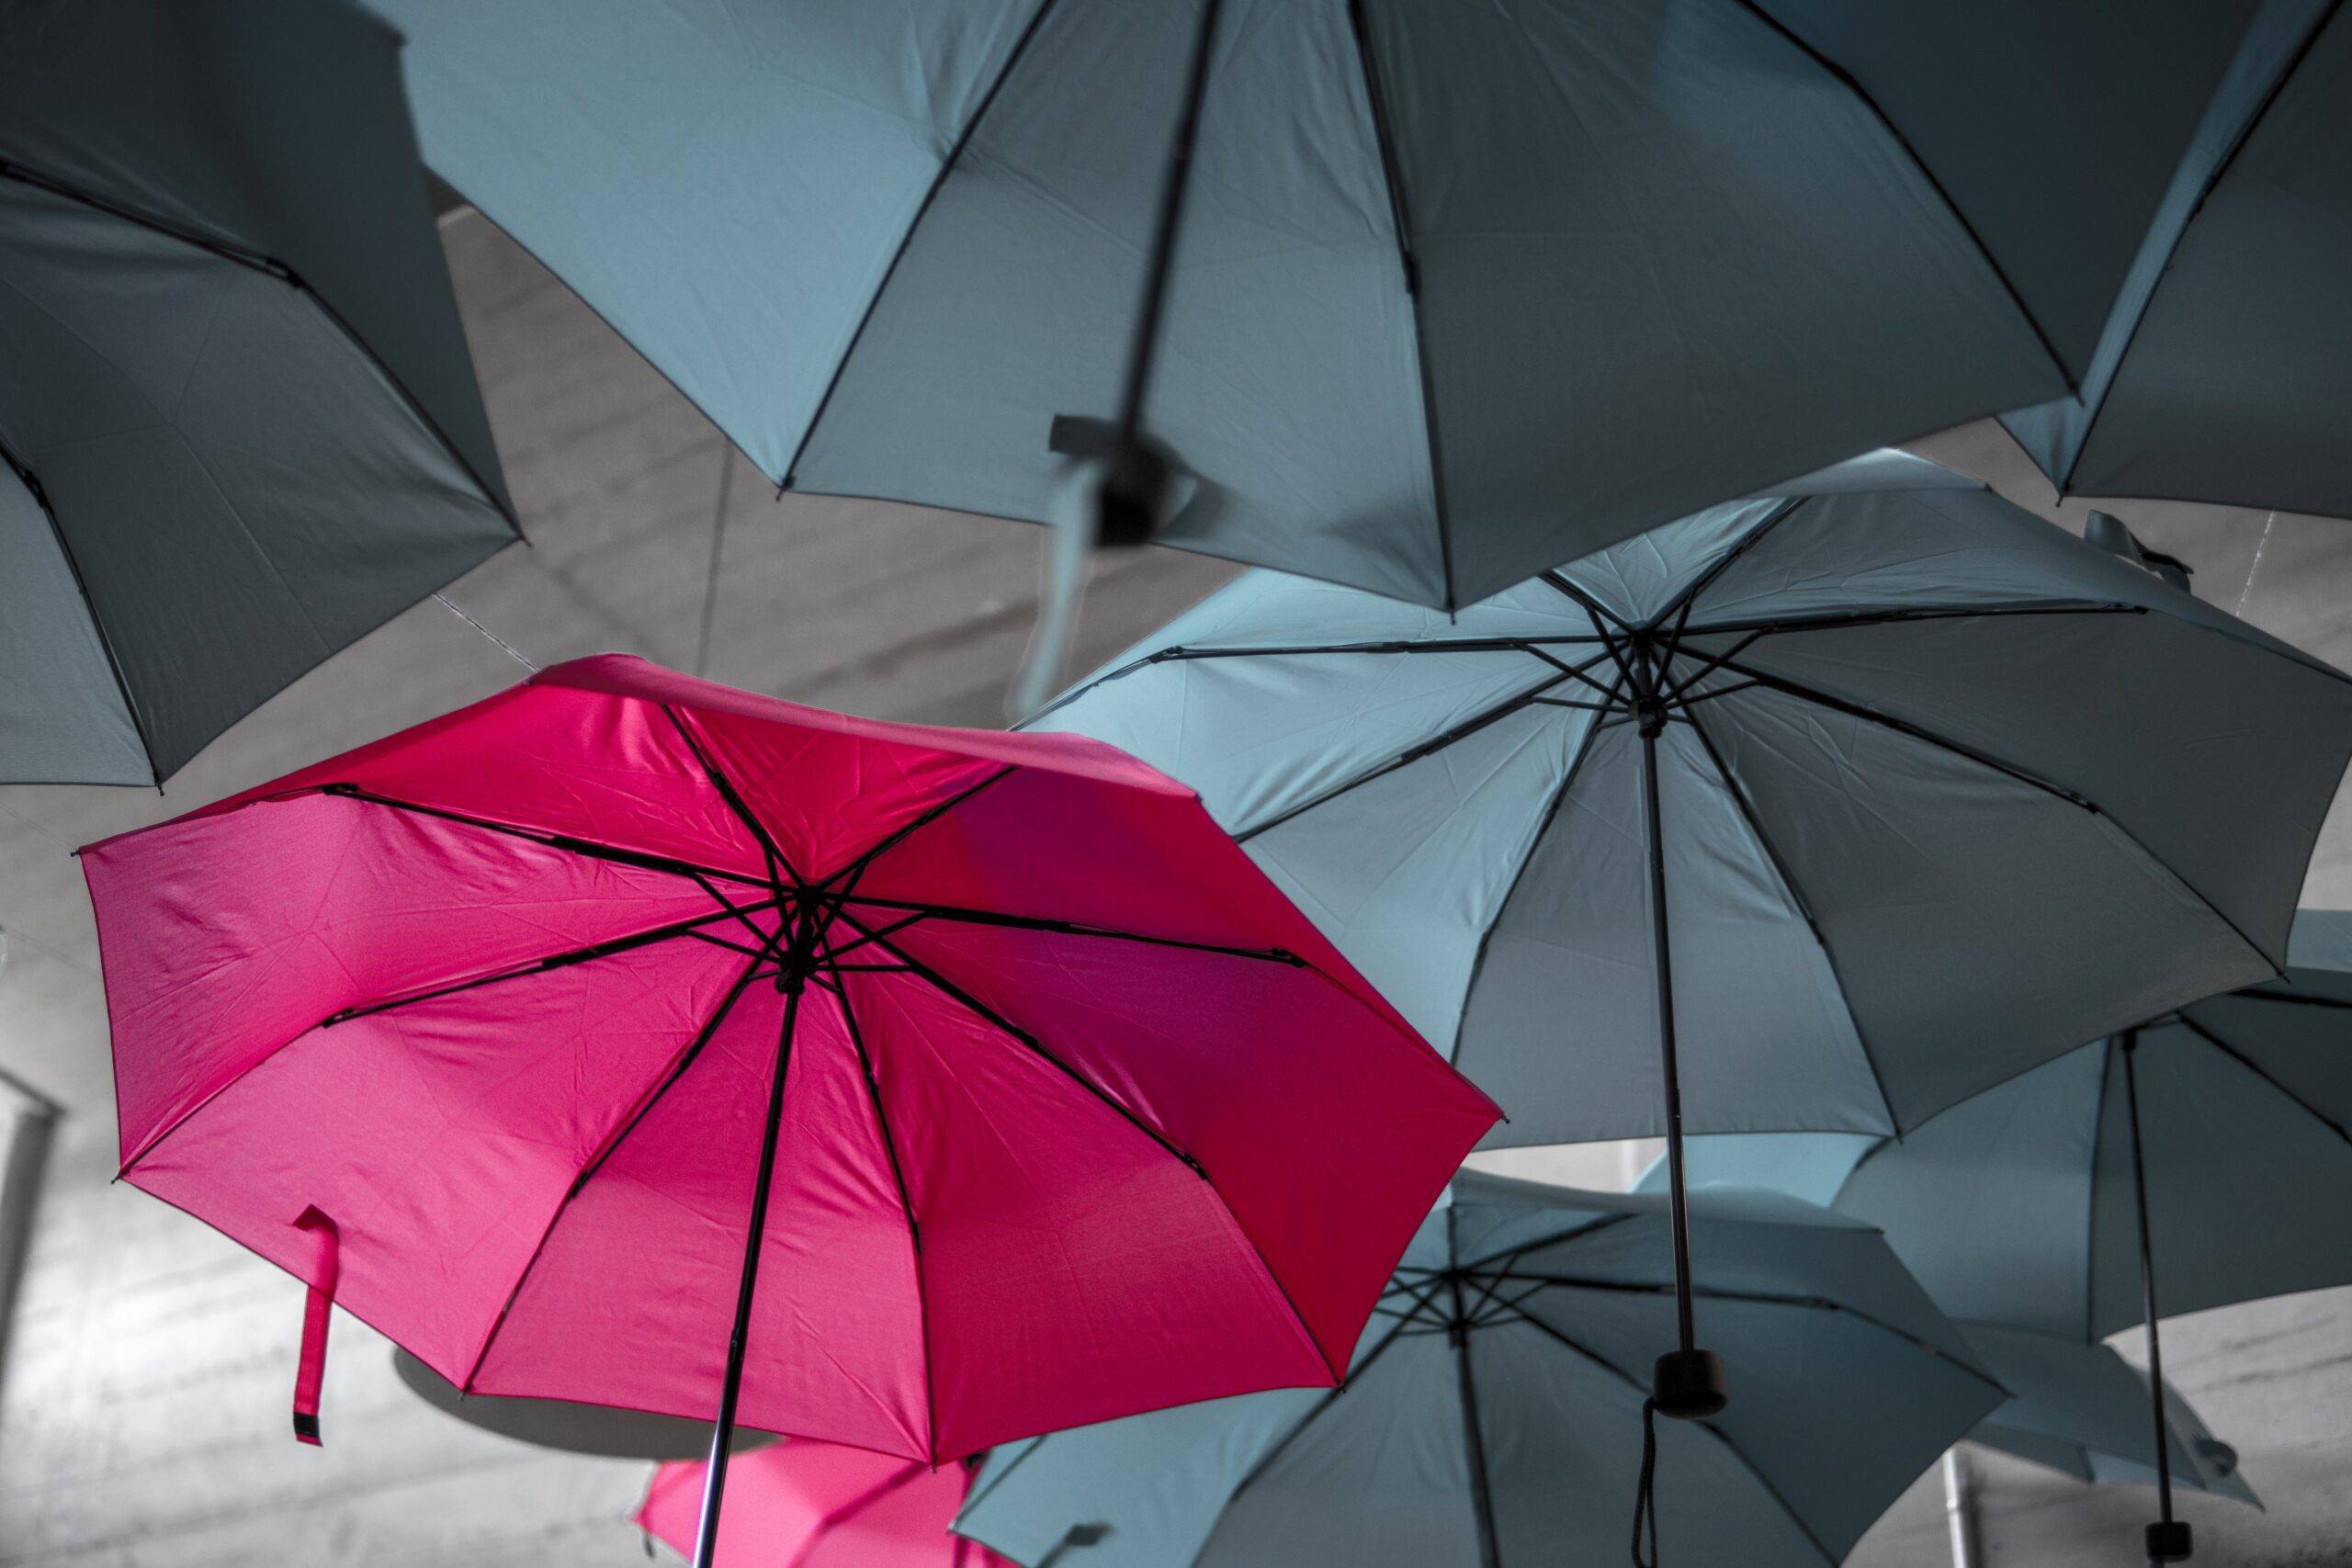 Stand out from the crowd with a red umbrella